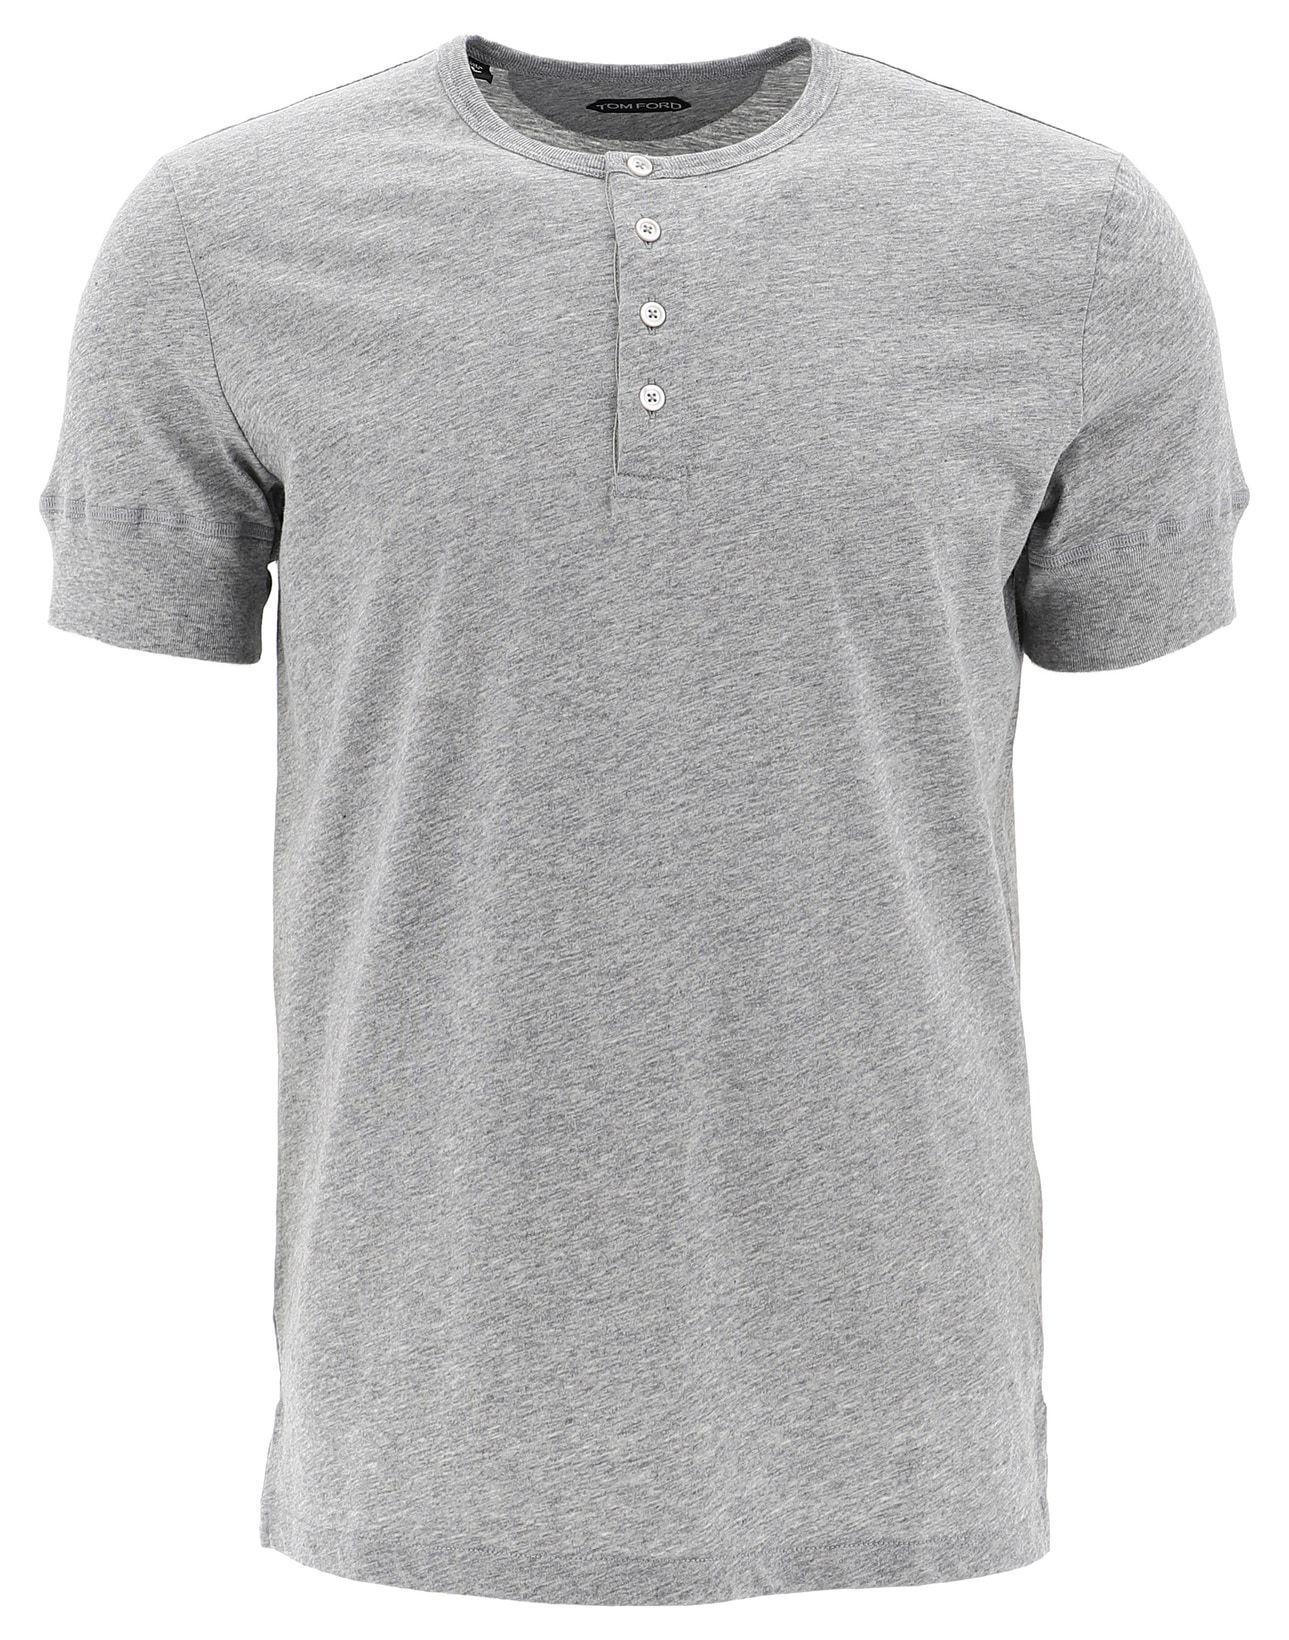 Tom Ford Buttoned Crew Neck T-shirt in White for Men - Lyst